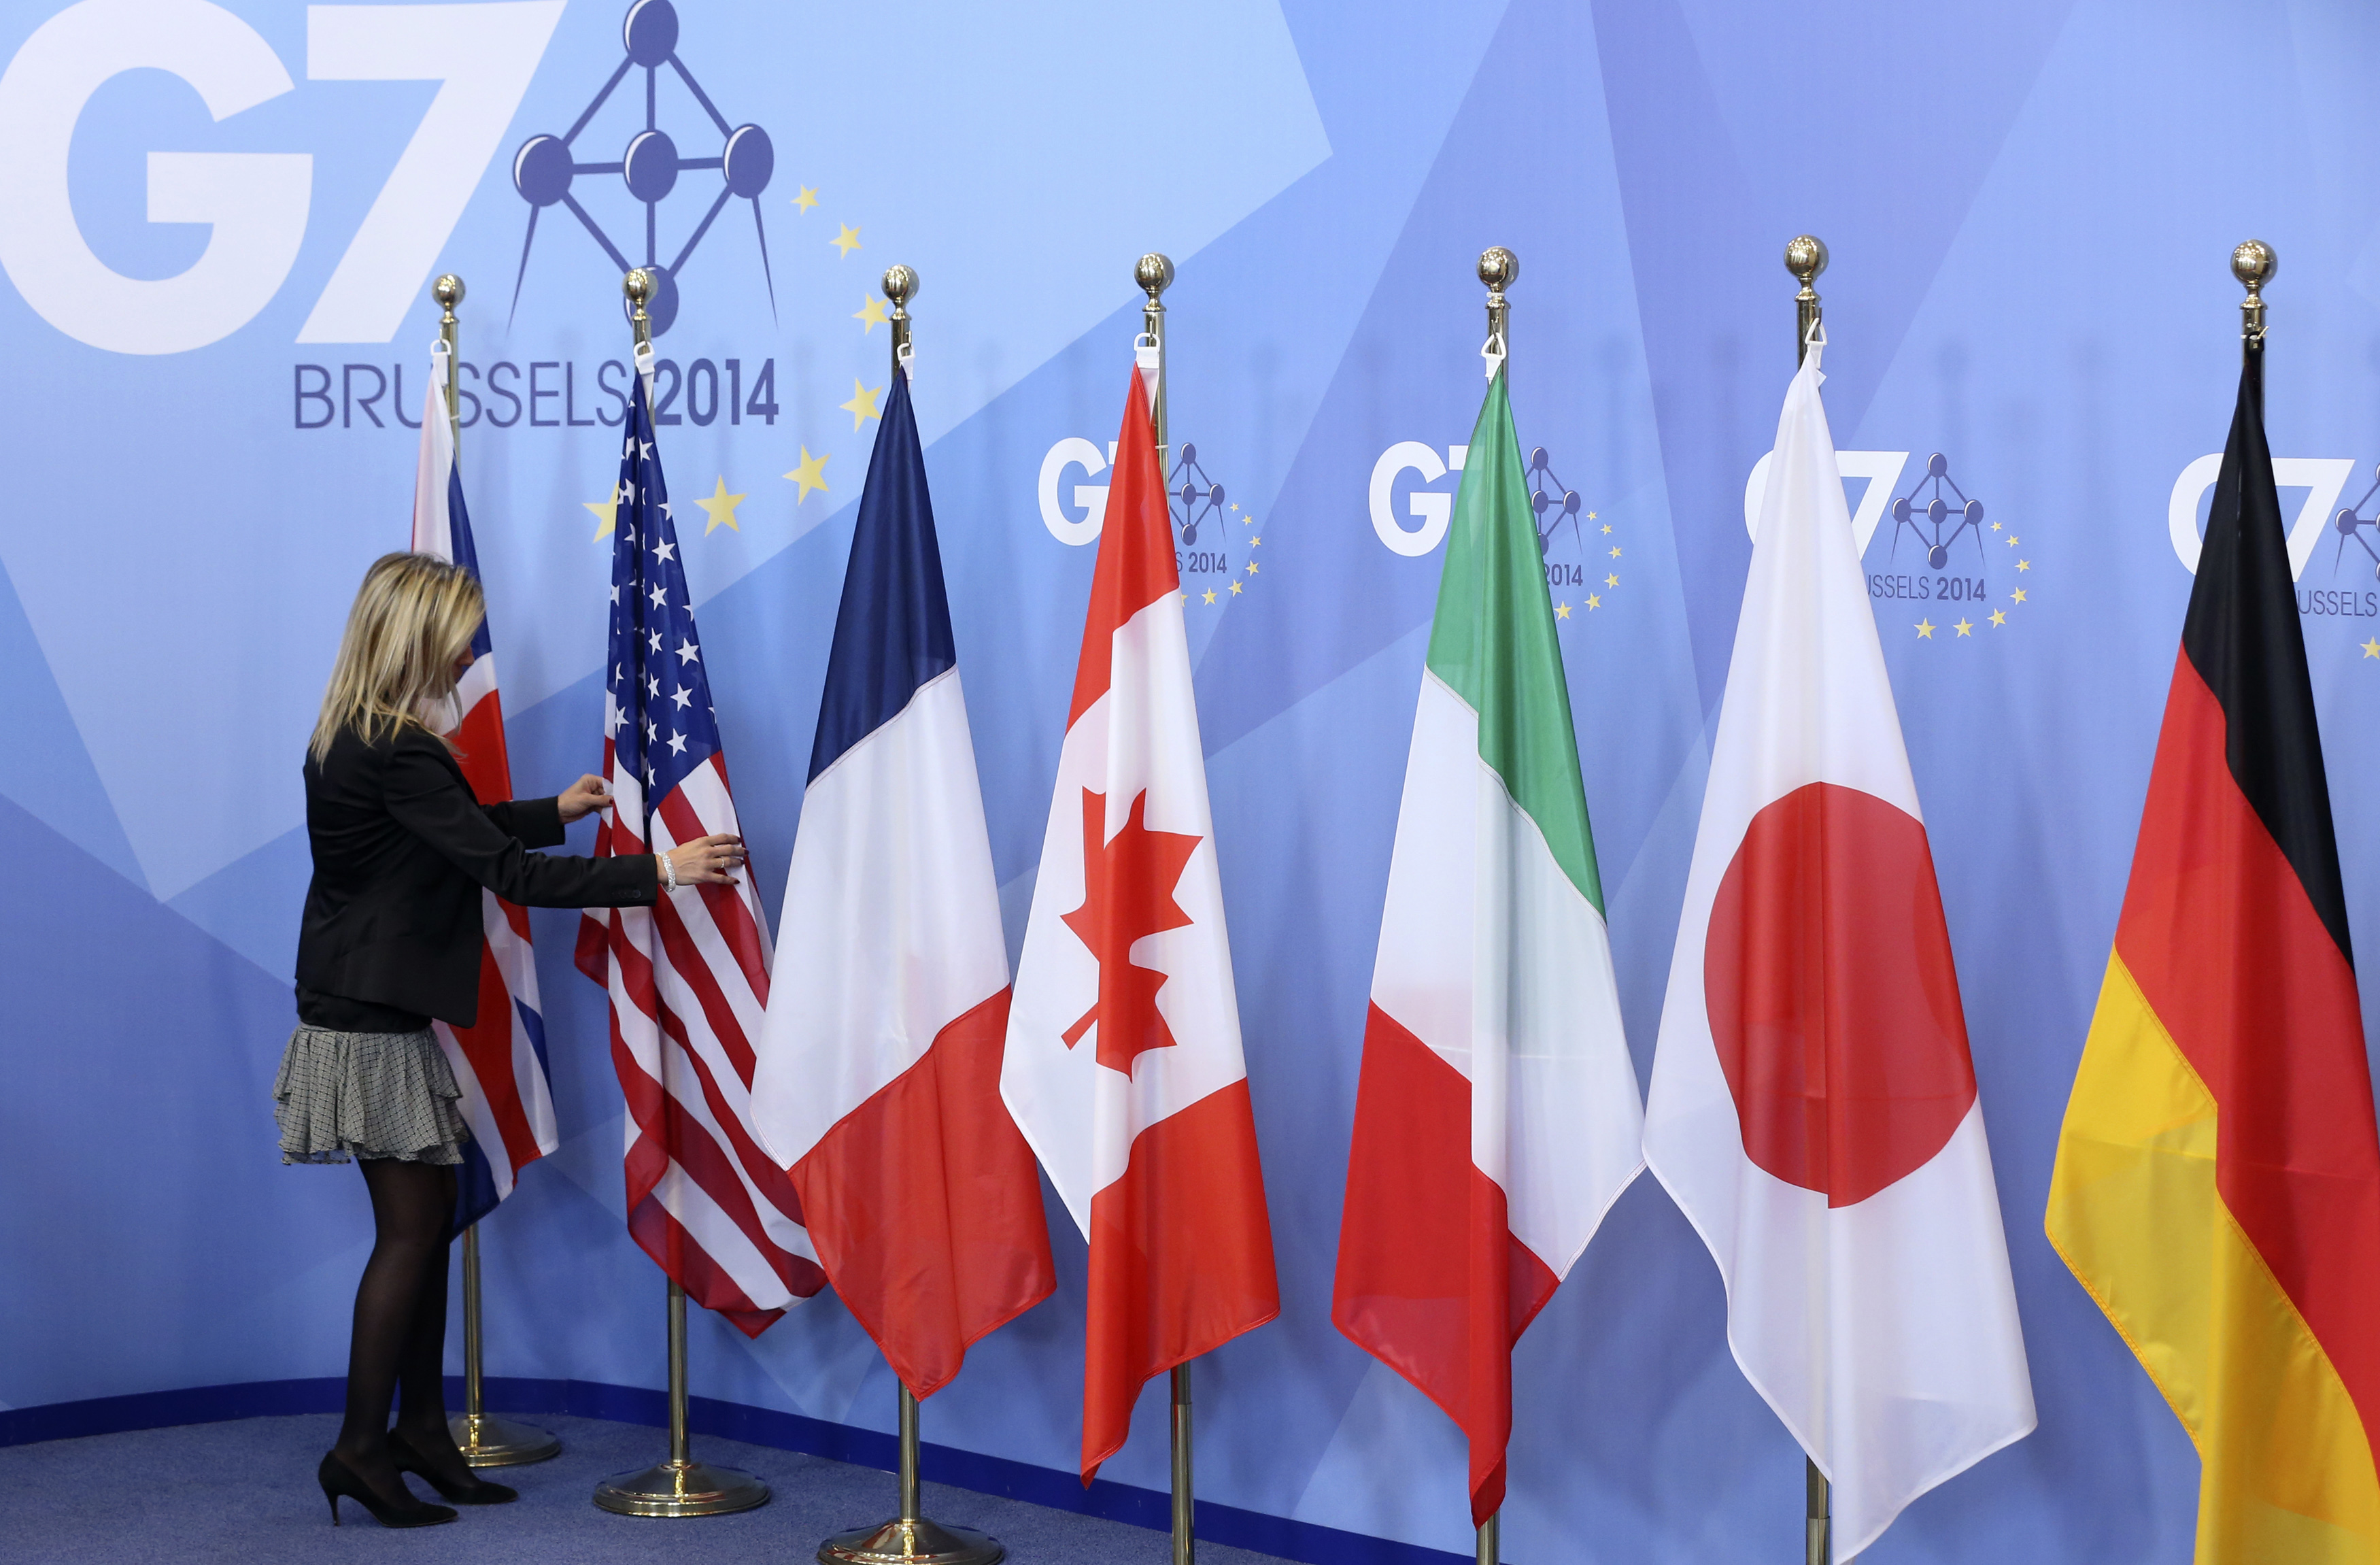 An official adjusts flags during the G7 summit at the European Council building in Brussels